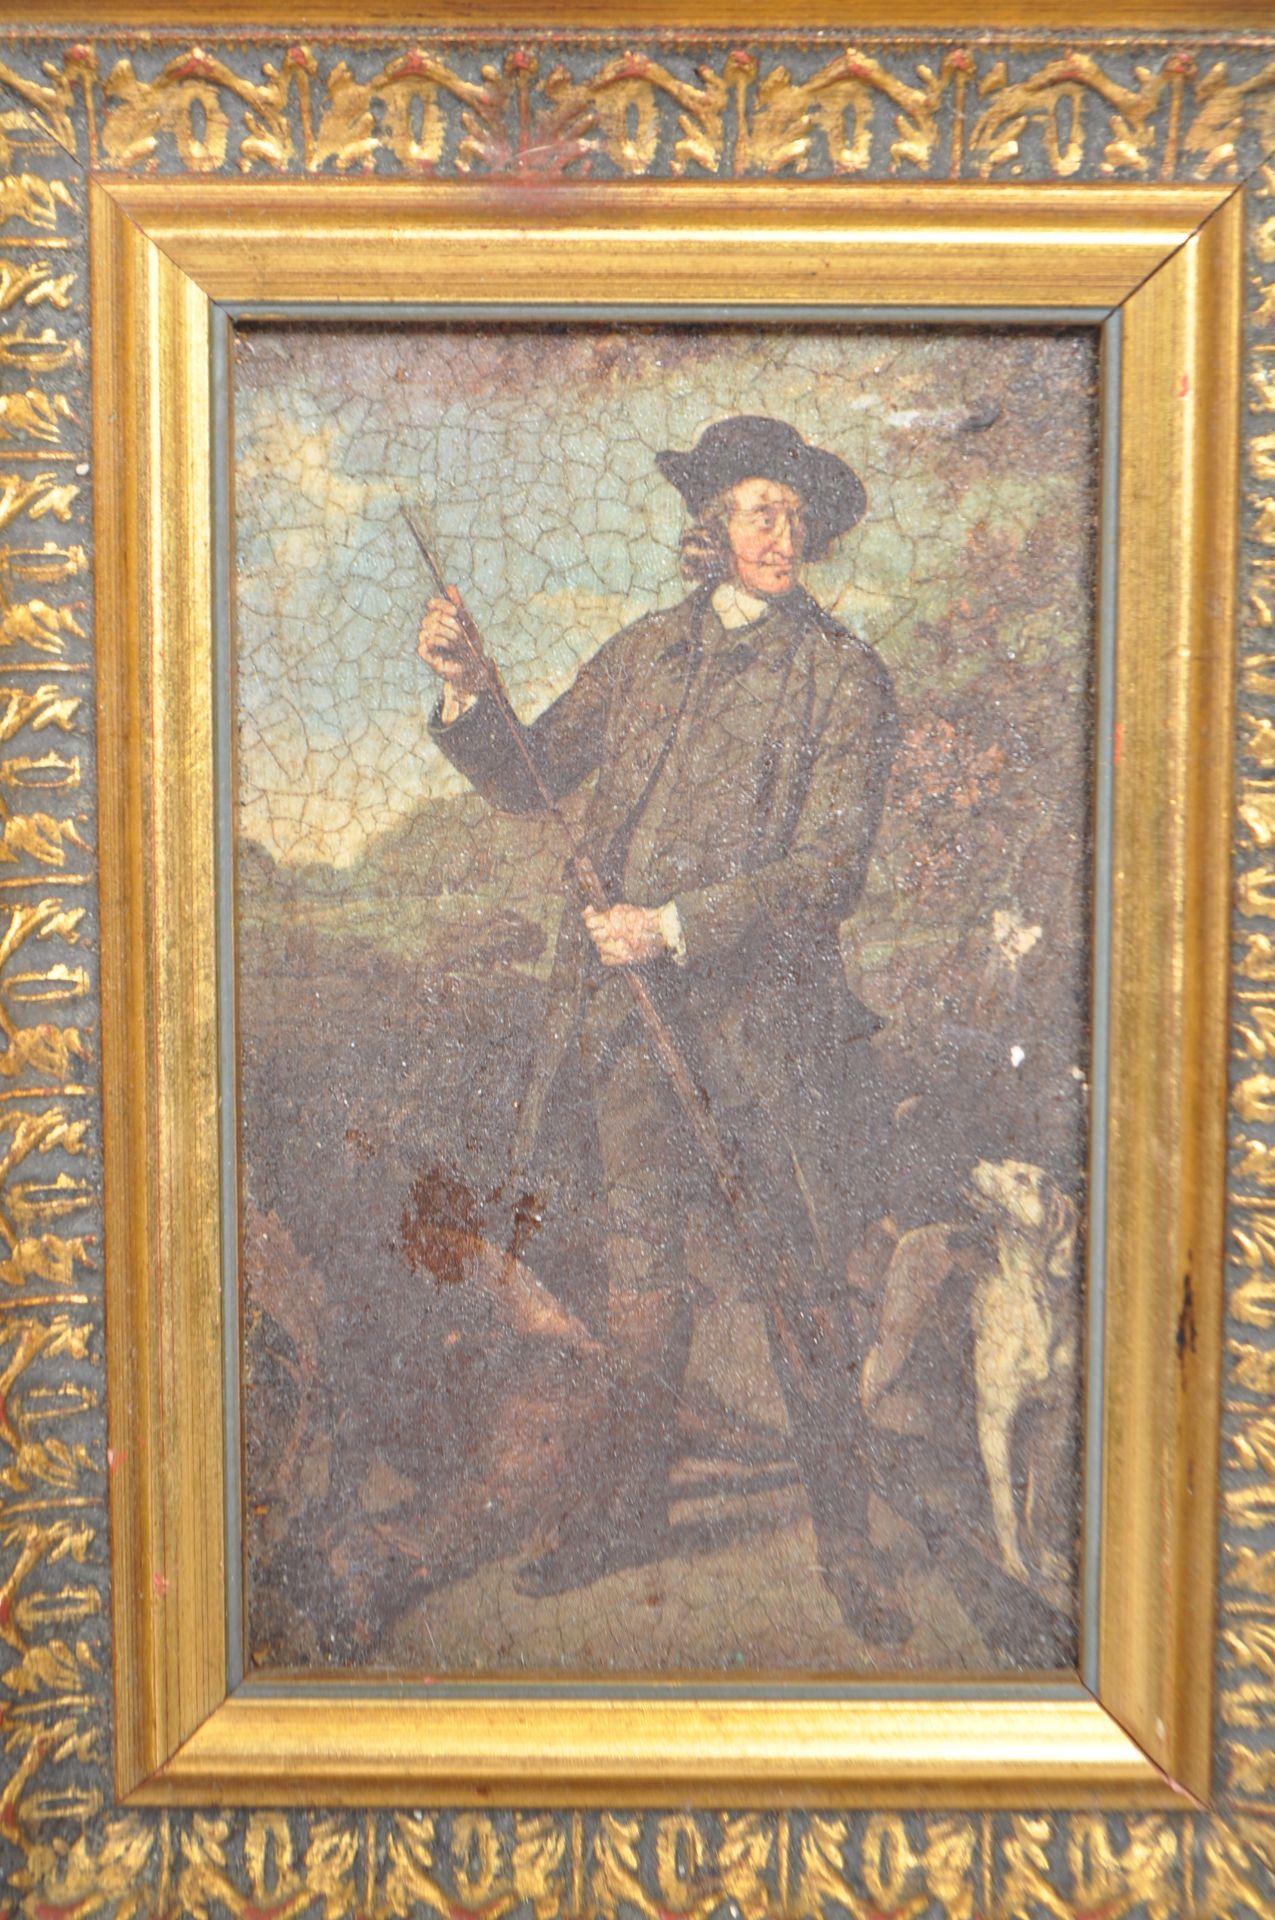 LATE 19TH CENTURY OIL ON BOARD PAINTING OF GAMEKEEPER & DOG - Image 2 of 3